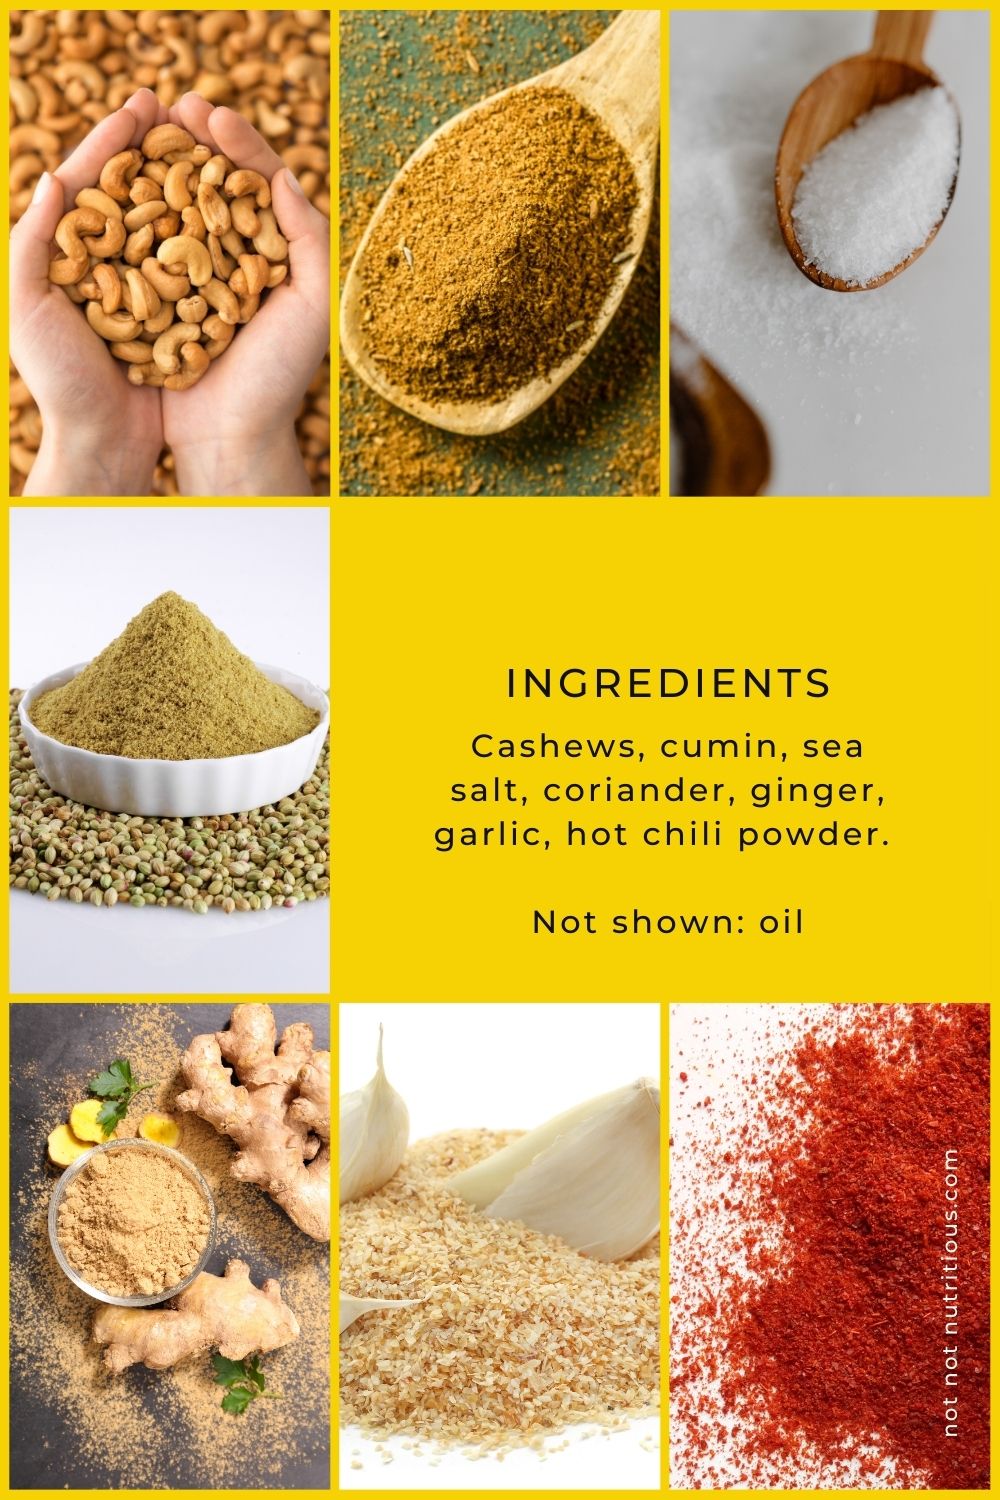 Ingredients for Spicy Cashew Butter, including cashews, cumin, coriander, ginger, garlic, hot chili powder and sea salt